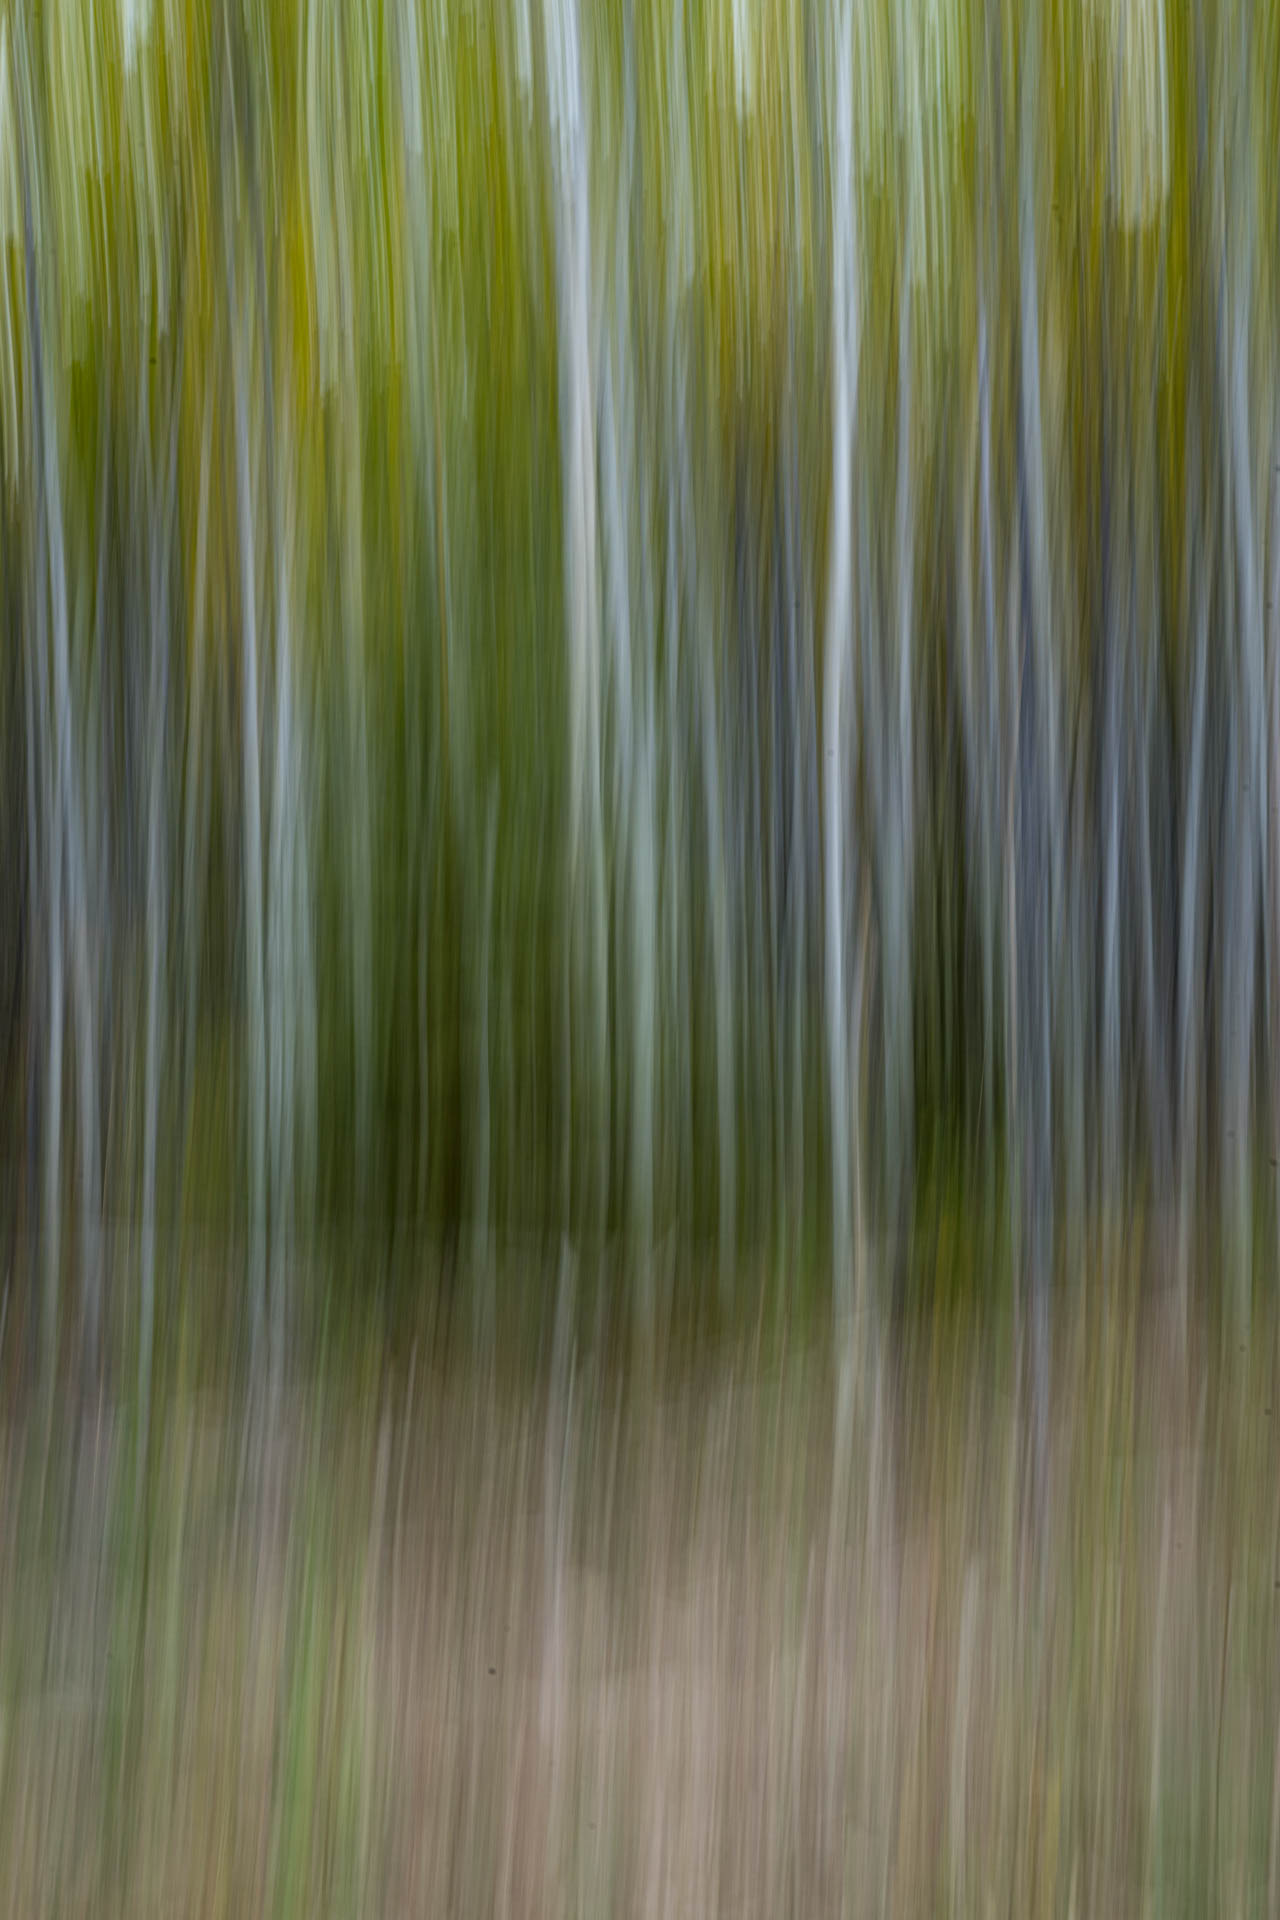 ICM (Intentional Camera Movement) of Birch trees on the North Klondike Highway